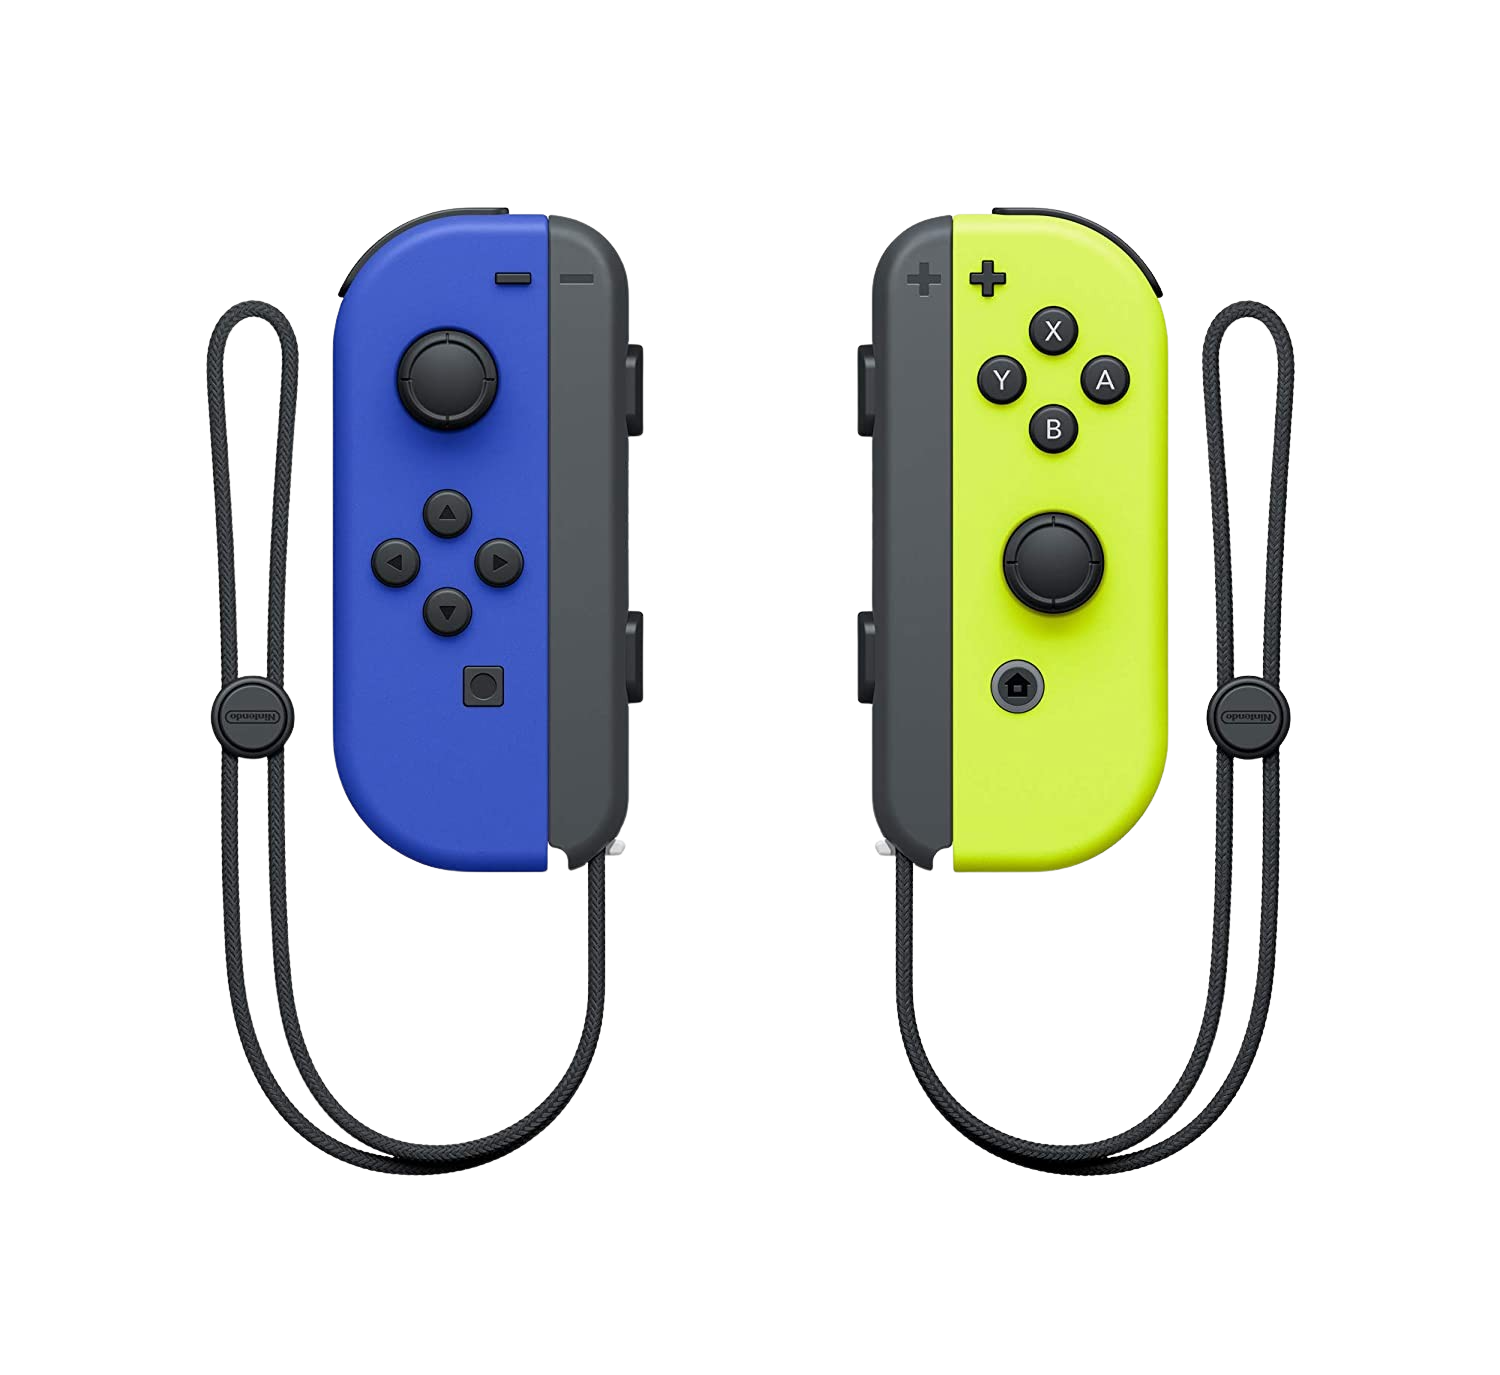 Rent Nintendo Joy-Con (L/R) Wireless Controllers from $4.90 per month